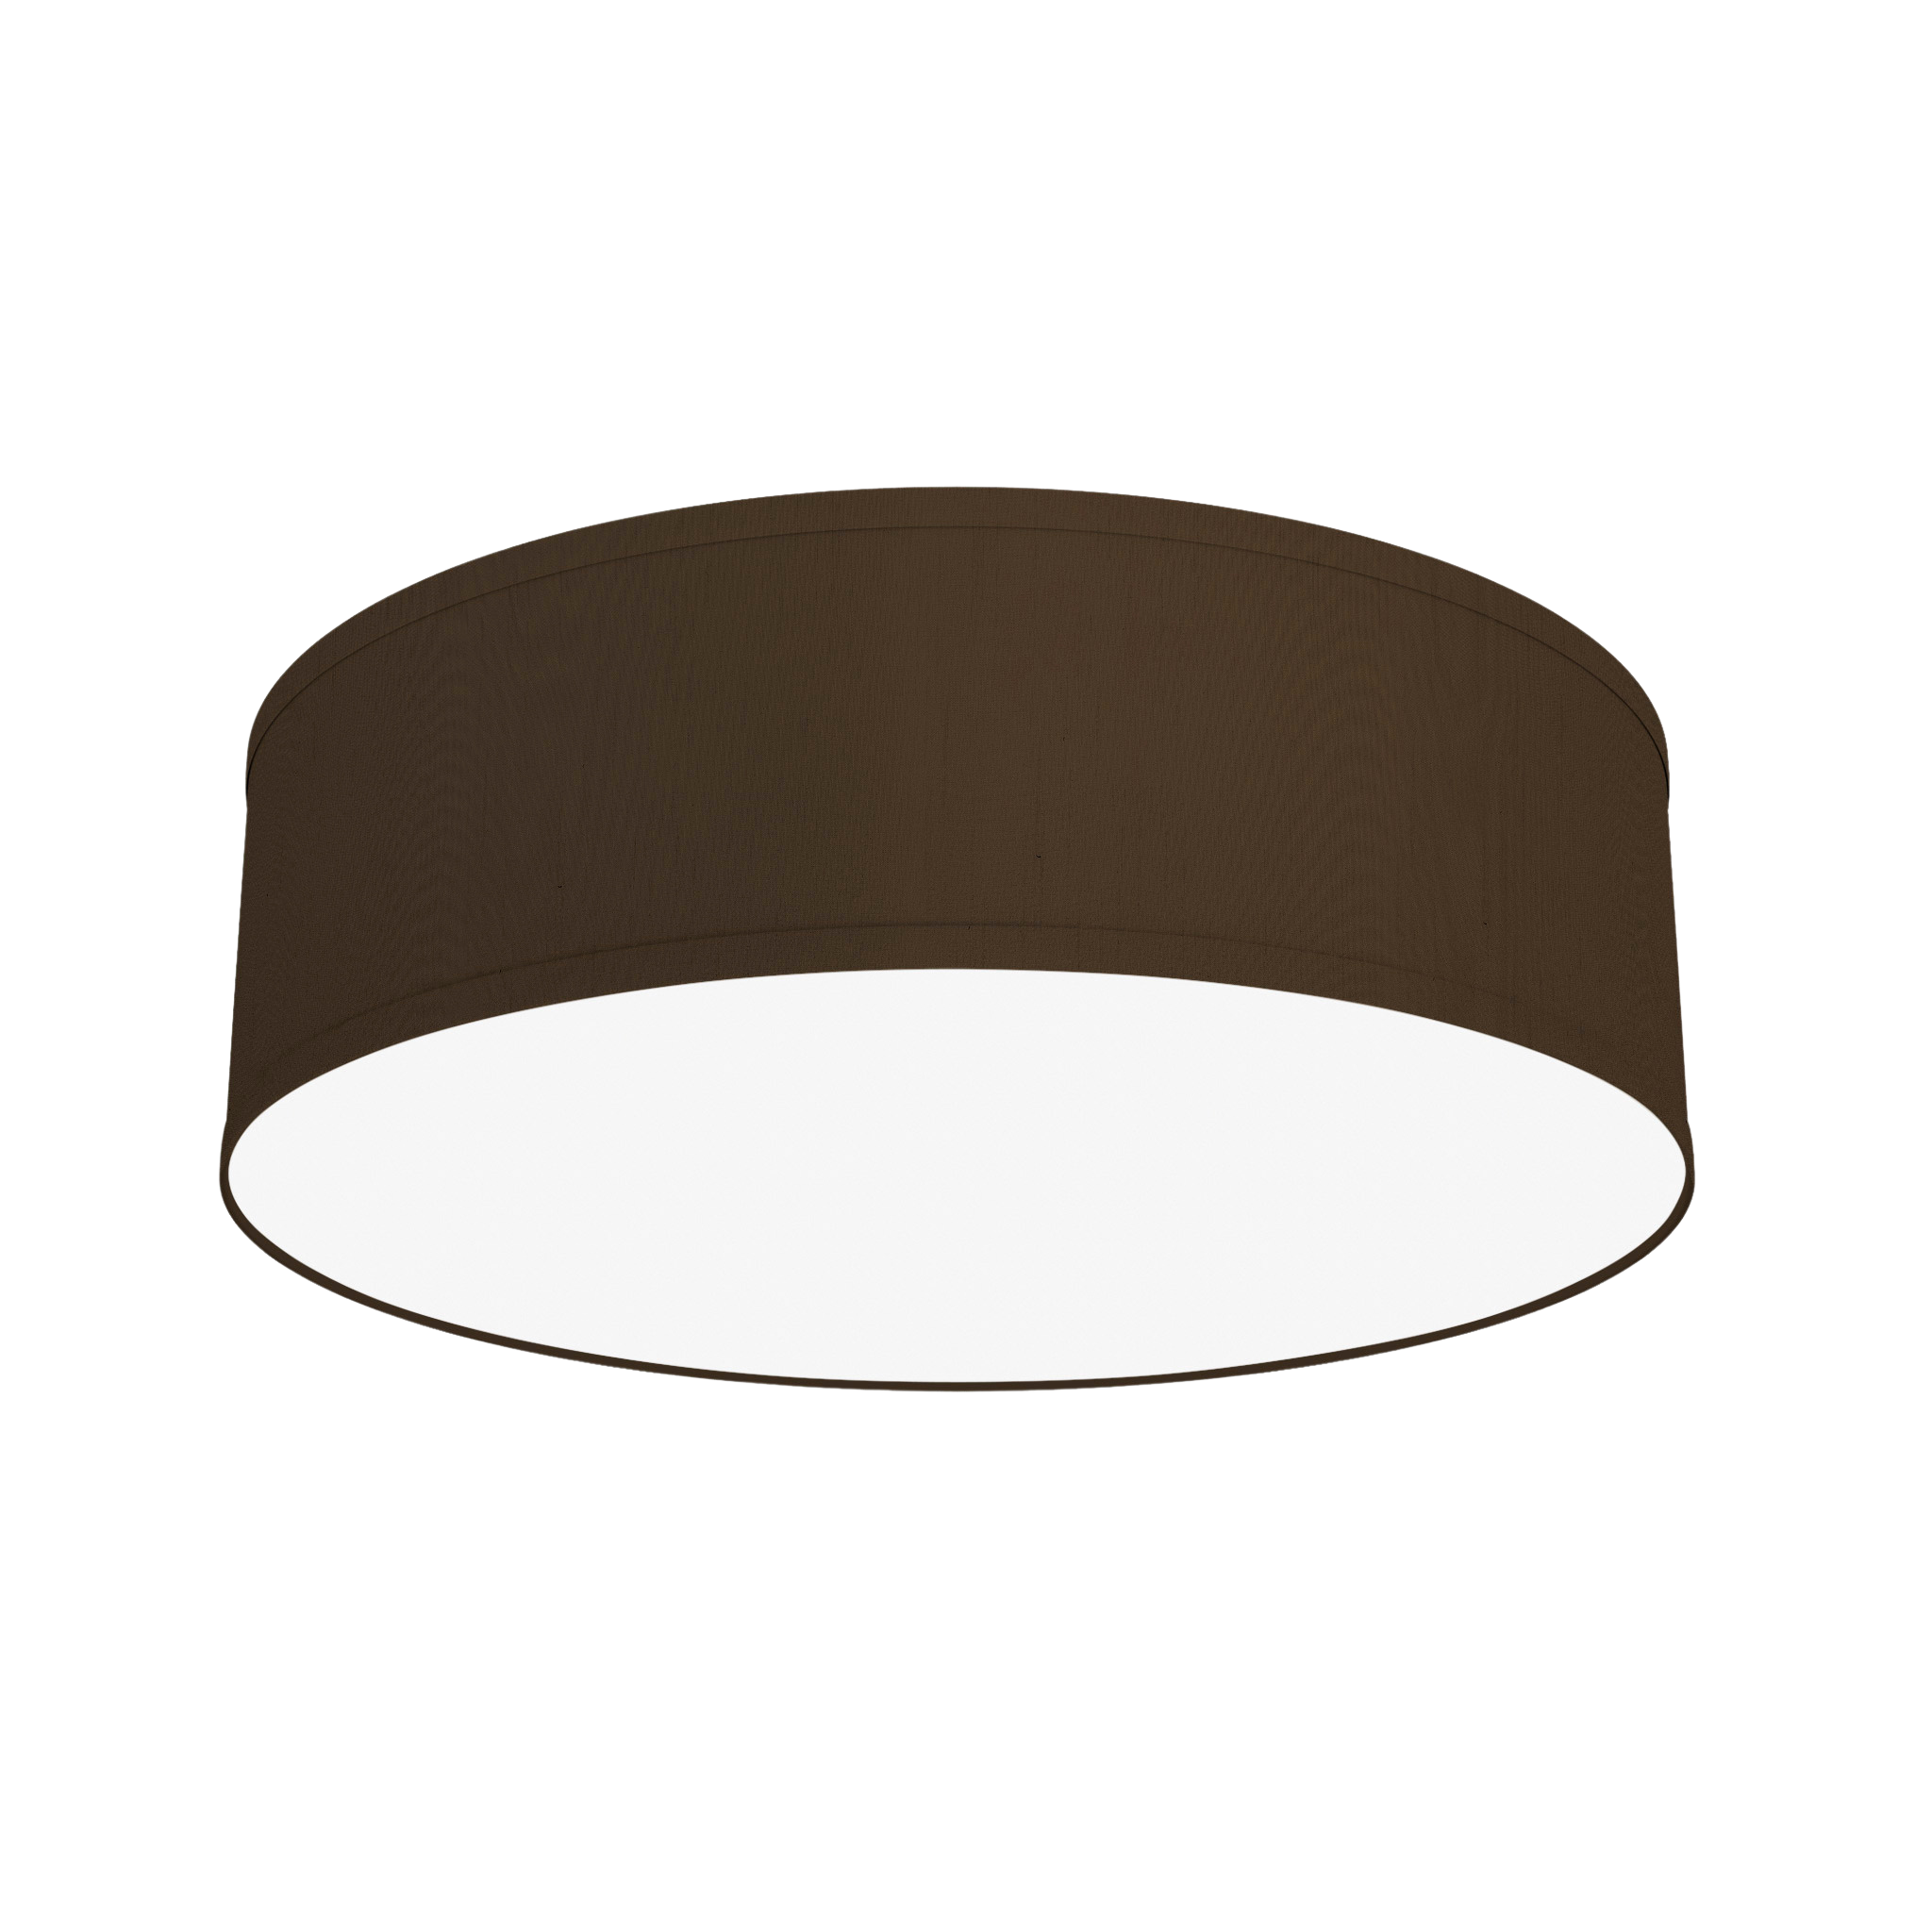 The Amy Semi Flush Mount from Seascape Fixtures in silk, chocolate color.